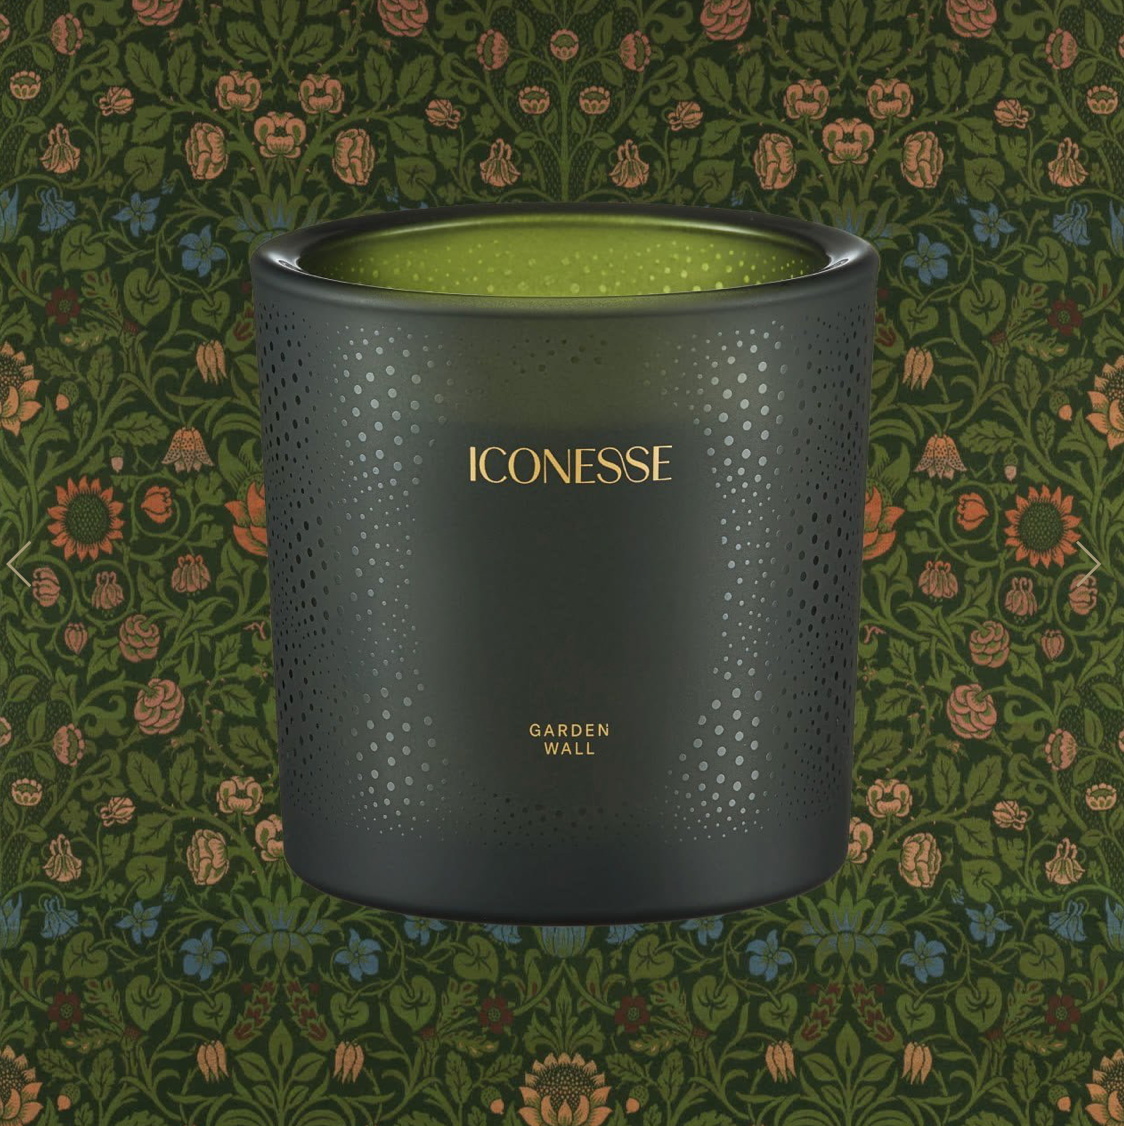 Garden Wall candle by Iconesse